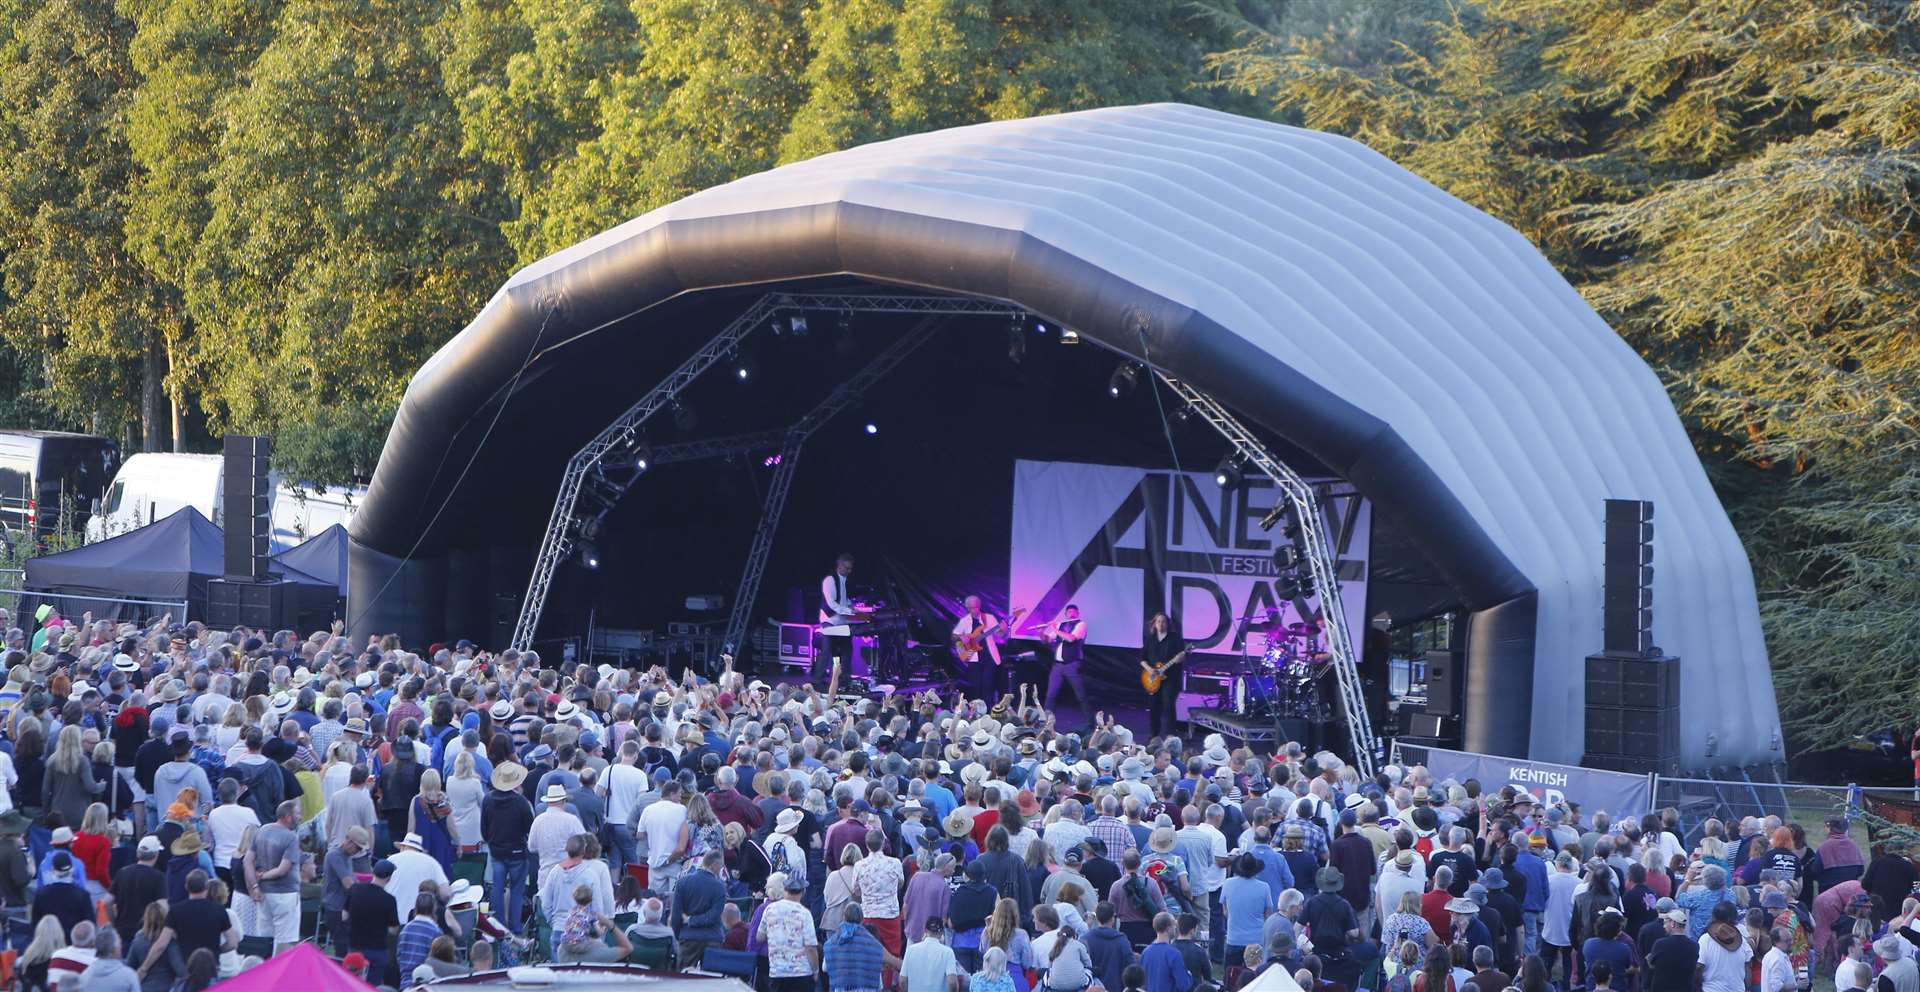 A New Day Festival will be at Mount Ephraim Gardens